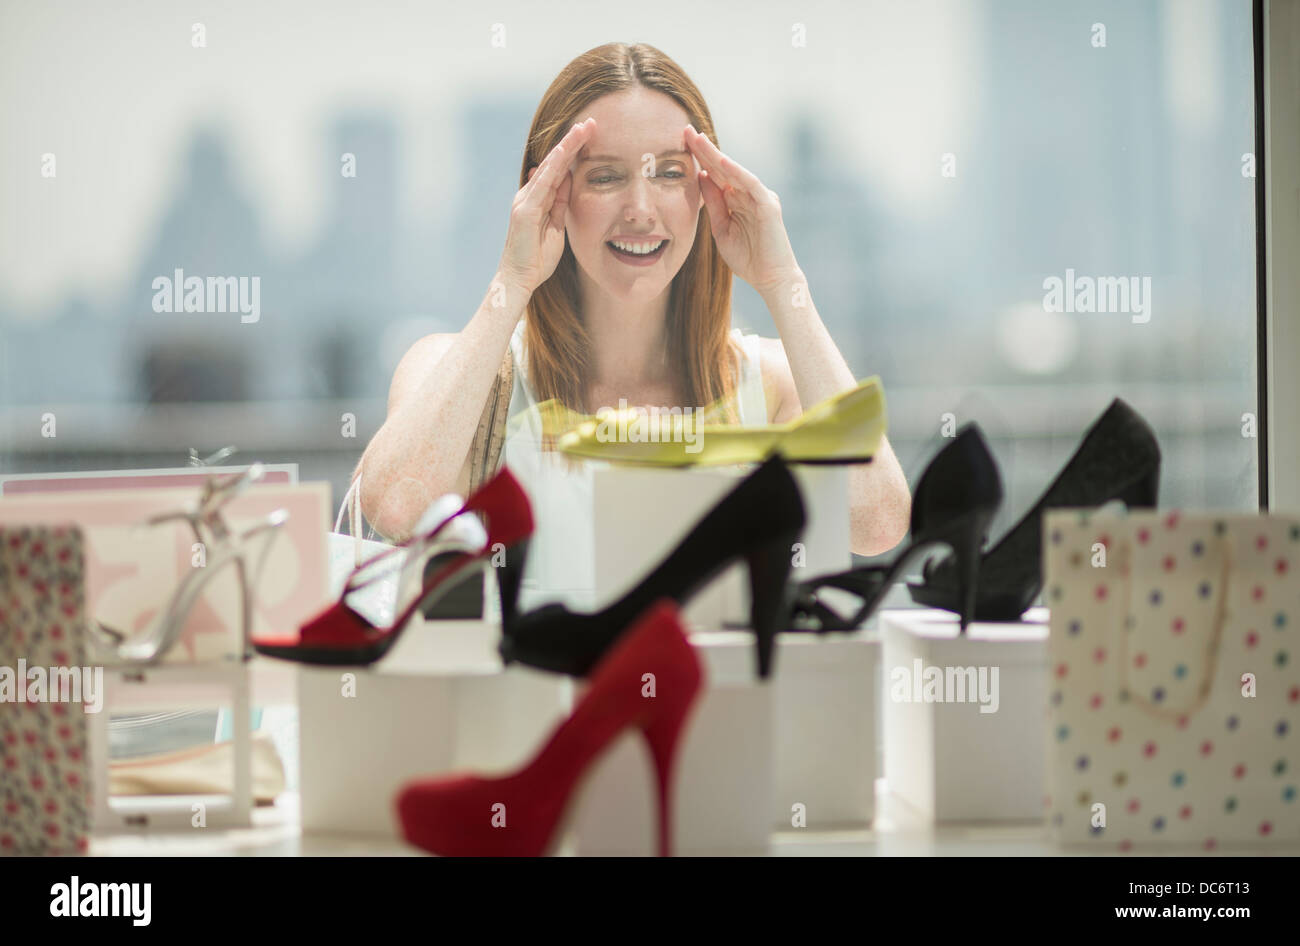 Woman shopping for shoes Stock Photo